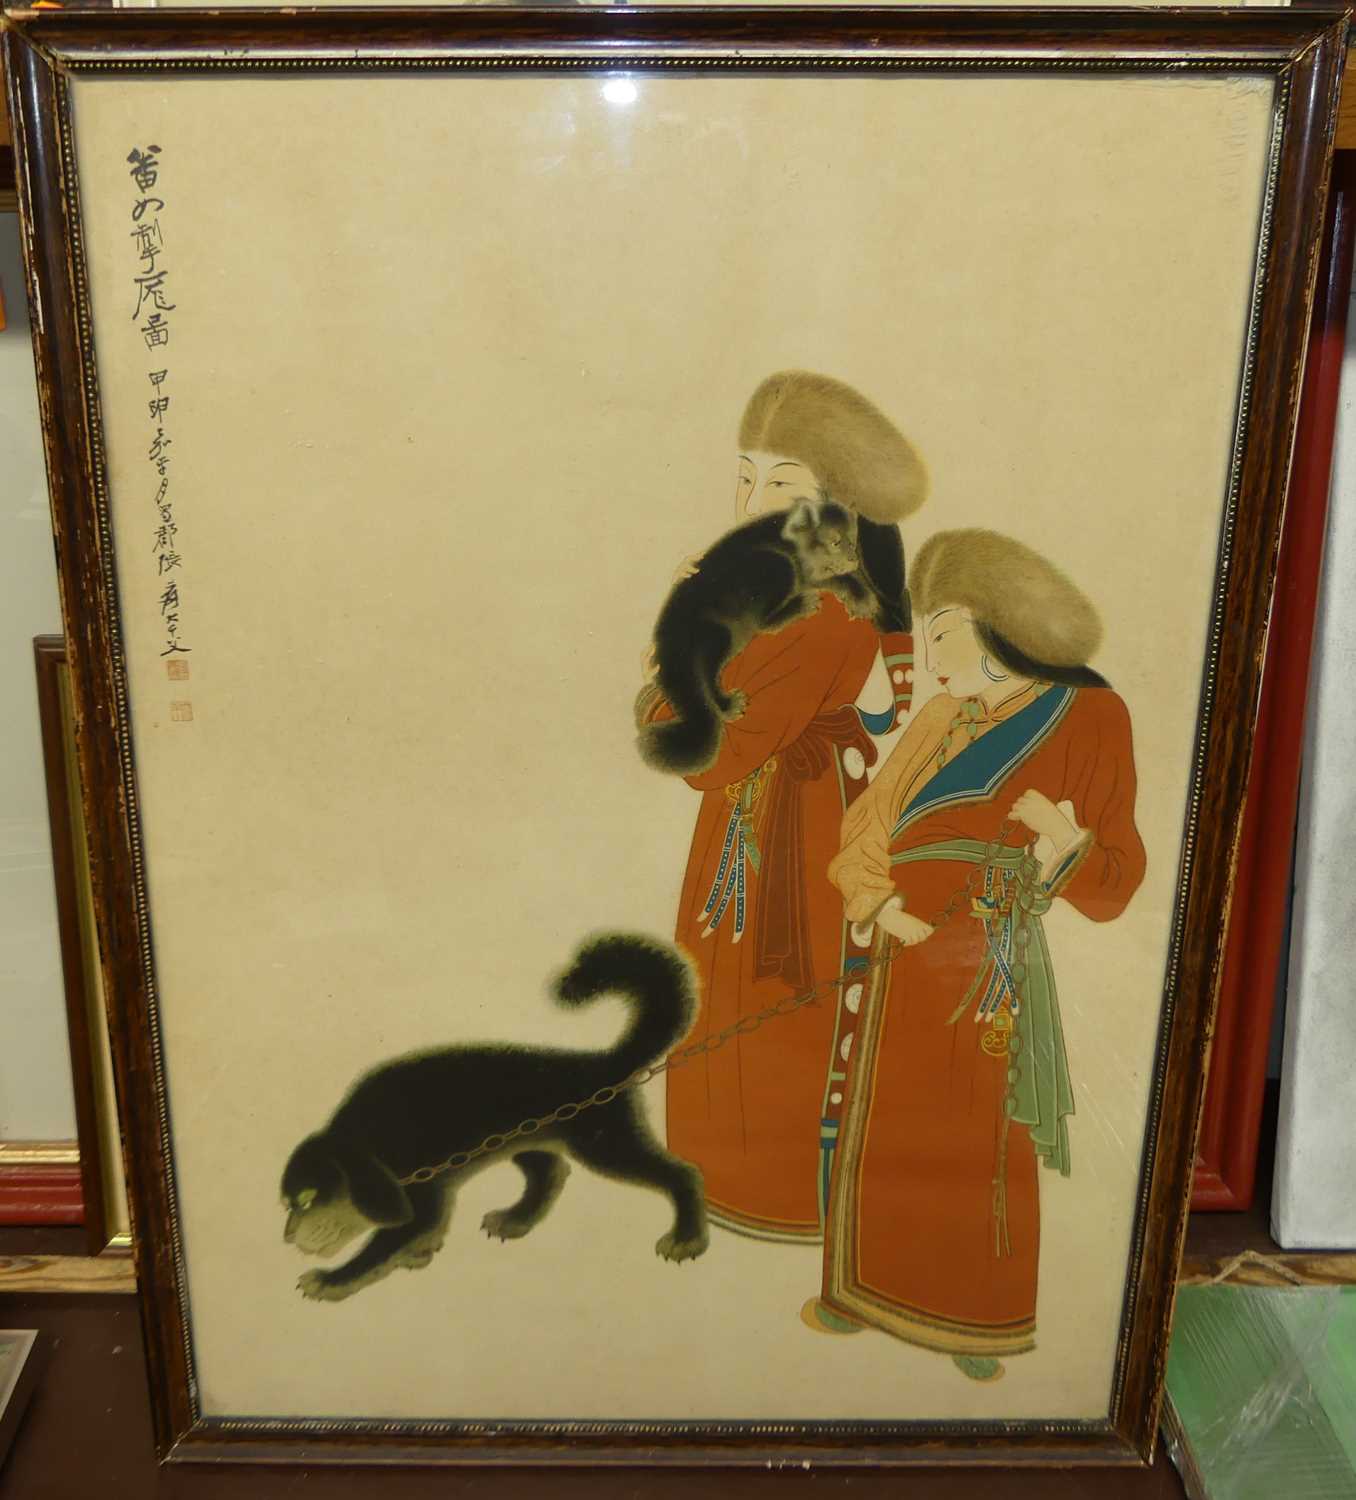 Four various Chinese prints, each with studio seals, various sizes, all 20th century - Image 2 of 6